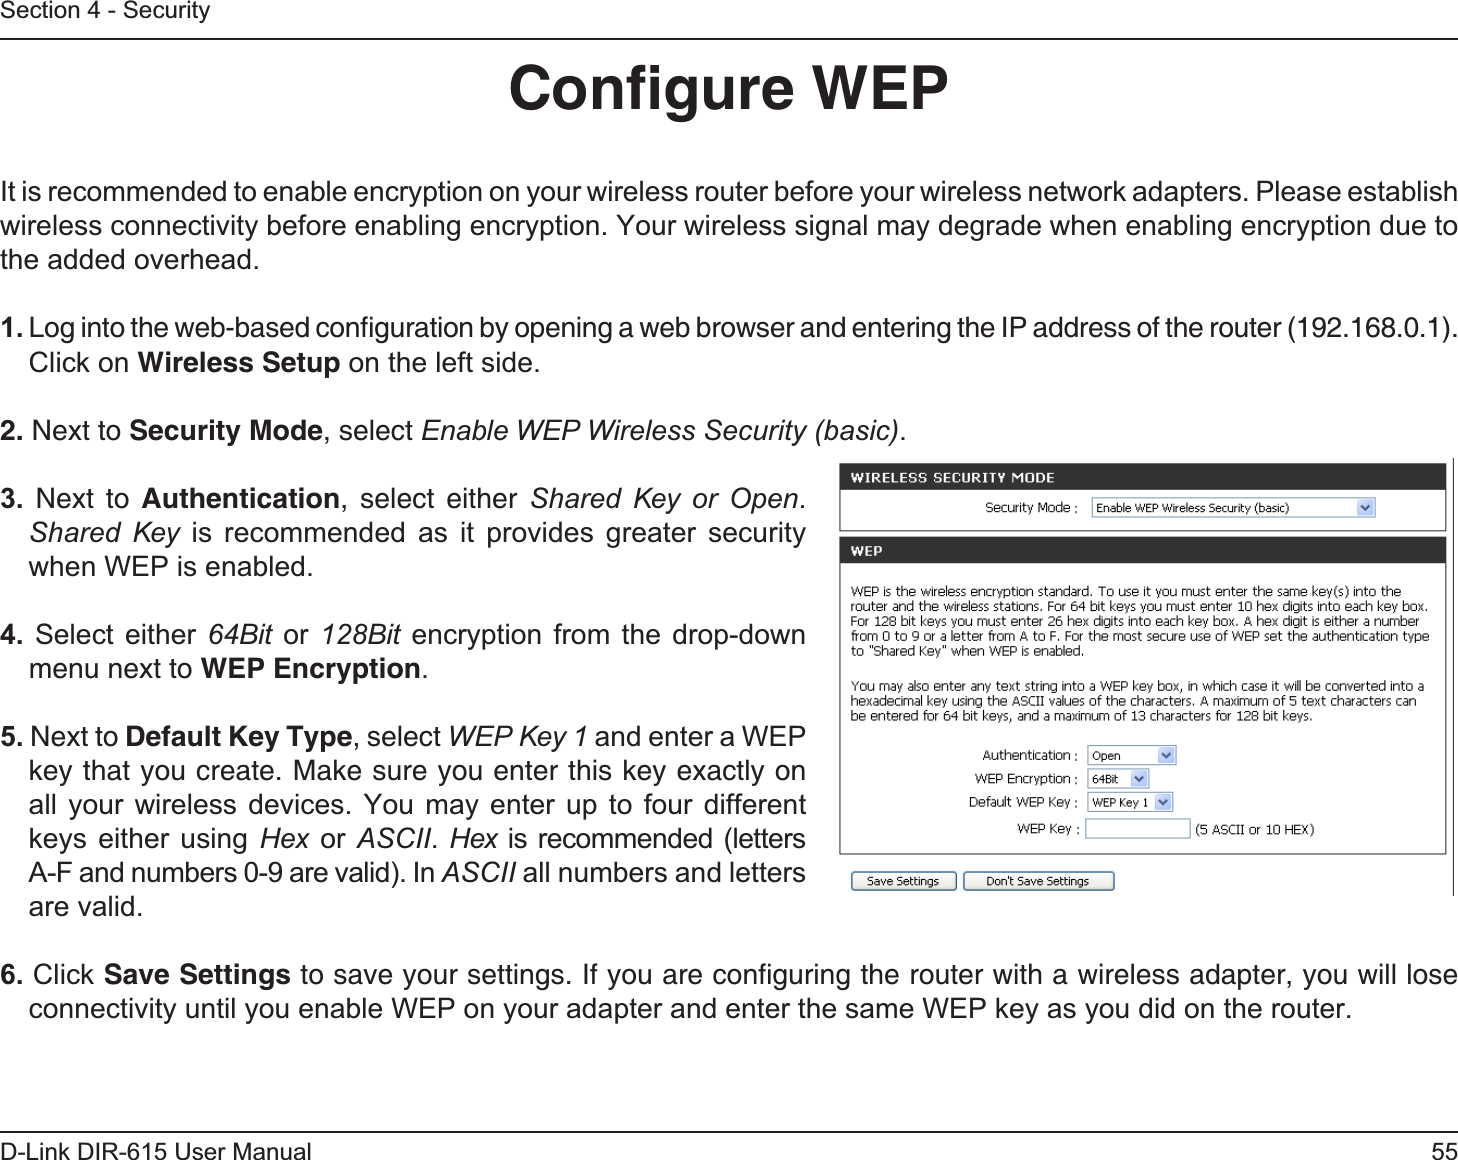 55D-Link DIR-615 User ManualSection 4 - SecurityConﬁgure WEPIt is recommended to enable encryption on your wireless router before your wireless network adapters. Please establish wireless connectivity before enabling encryption. Your wireless signal may degrade when enabling encryption due to the added overhead.1. Log into the web-based conﬁguration by opening a web browser and entering the IP address of the router (192.168.0.1).  Click on Wireless Setup on the left side.2. Next to Security Mode, select Enable WEP Wireless Security (basic).3. Next to Authentication, select either Shared Key or Open.Shared Key is recommended as it provides greater security when WEP is enabled.4. Select either 64Bit or 128Bit encryption from the drop-down menu next to WEP Encryption.5. Next to Default Key Type, select WEP Key 1 and enter a WEP key that you create. Make sure you enter this key exactly on all your wireless devices. You may enter up to four different keys either using Hex or ASCII.Hex is recommended (letters A-F and numbers 0-9 are valid). In ASCII all numbers and letters are valid.6. Click Save Settings to save your settings. If you are conﬁguring the router with a wireless adapter, you will lose connectivity until you enable WEP on your adapter and enter the same WEP key as you did on the router.